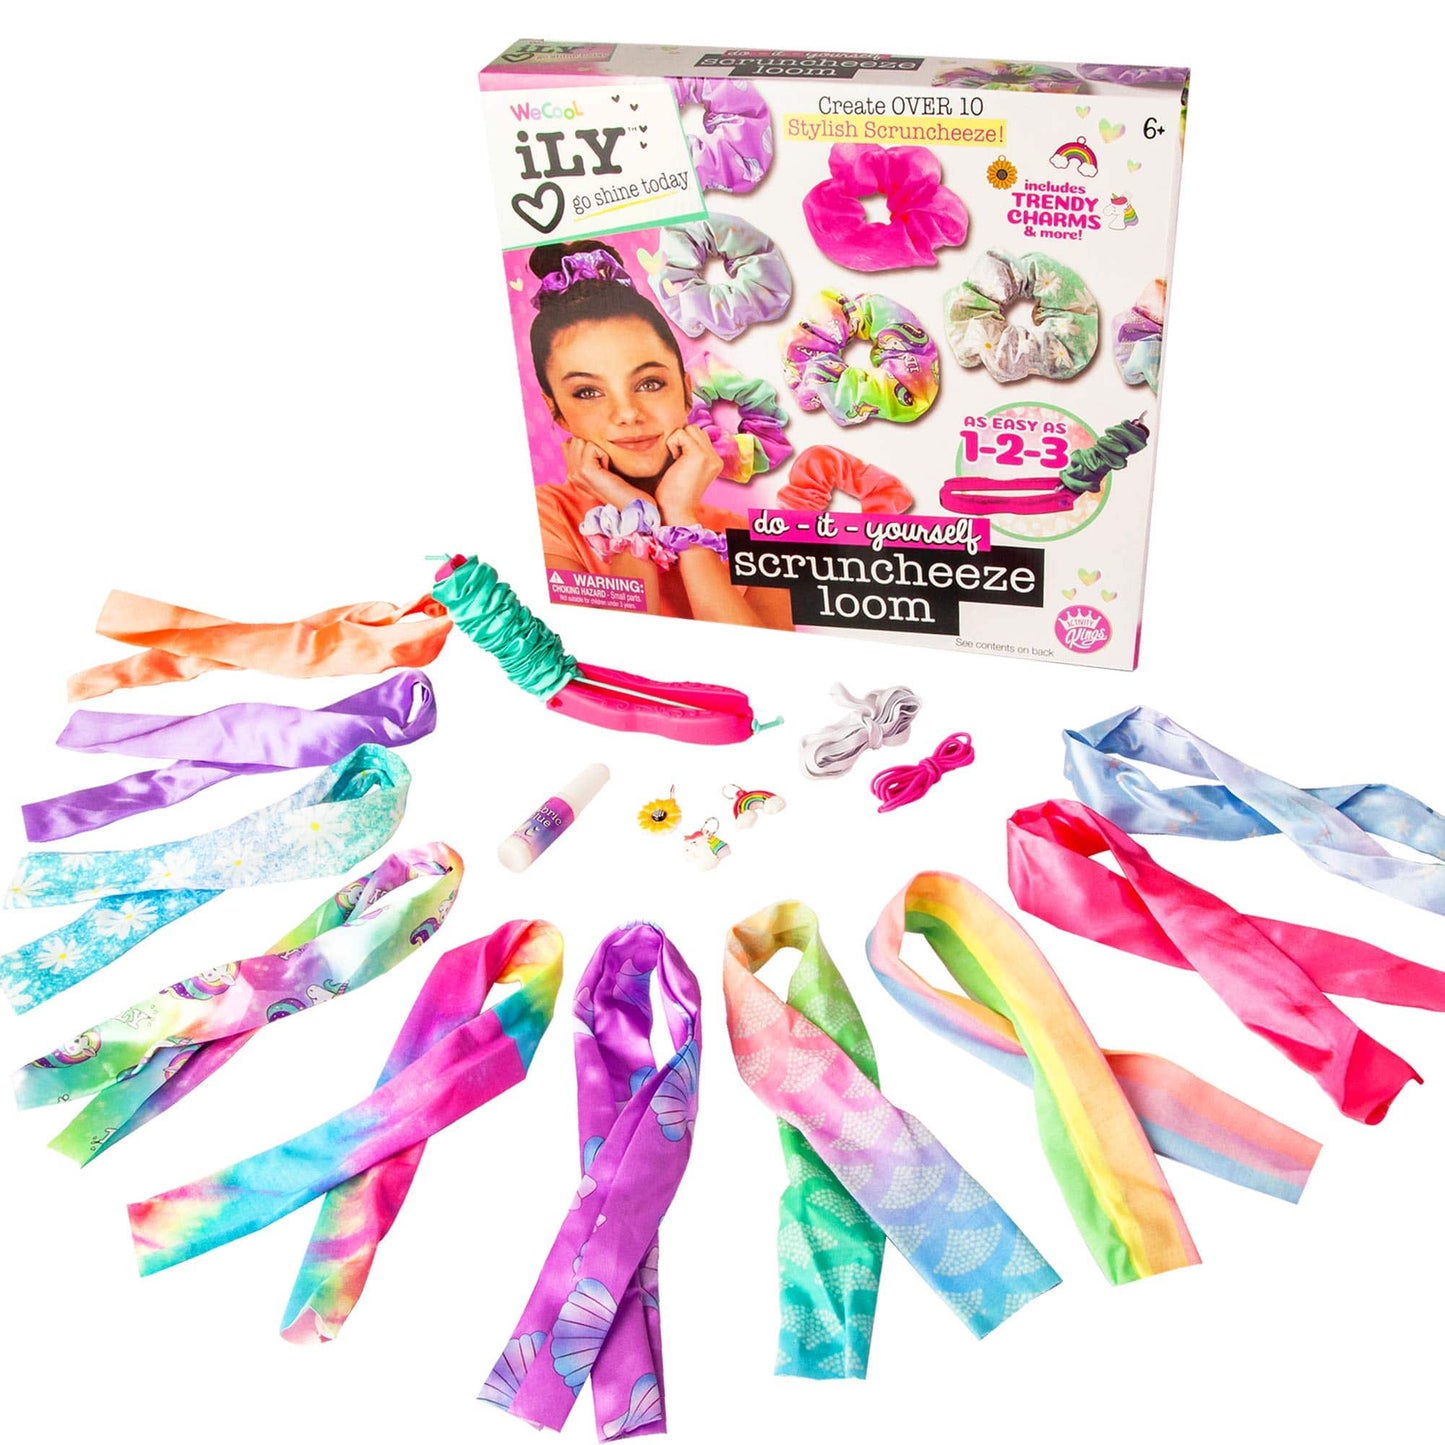 We Cool Jewelry Making Kits Schrunchie Loom DIY Kit